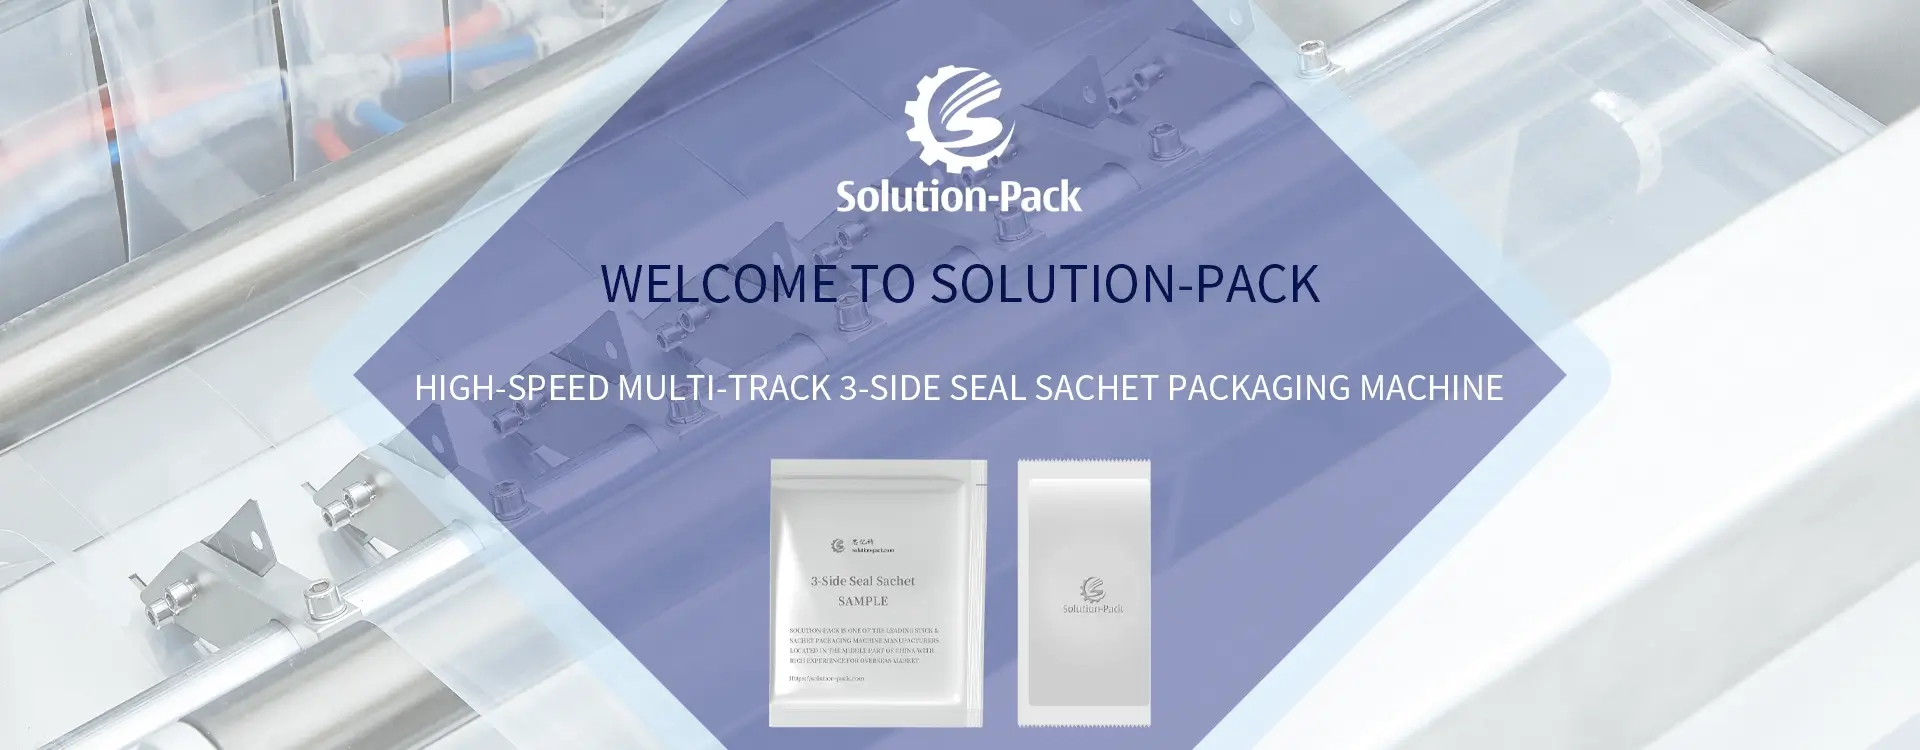 Multi-Tack 3-Side Seal Sachet High-Speed Packaging Machine Solution Heading Banner Picture | Solution-Pack